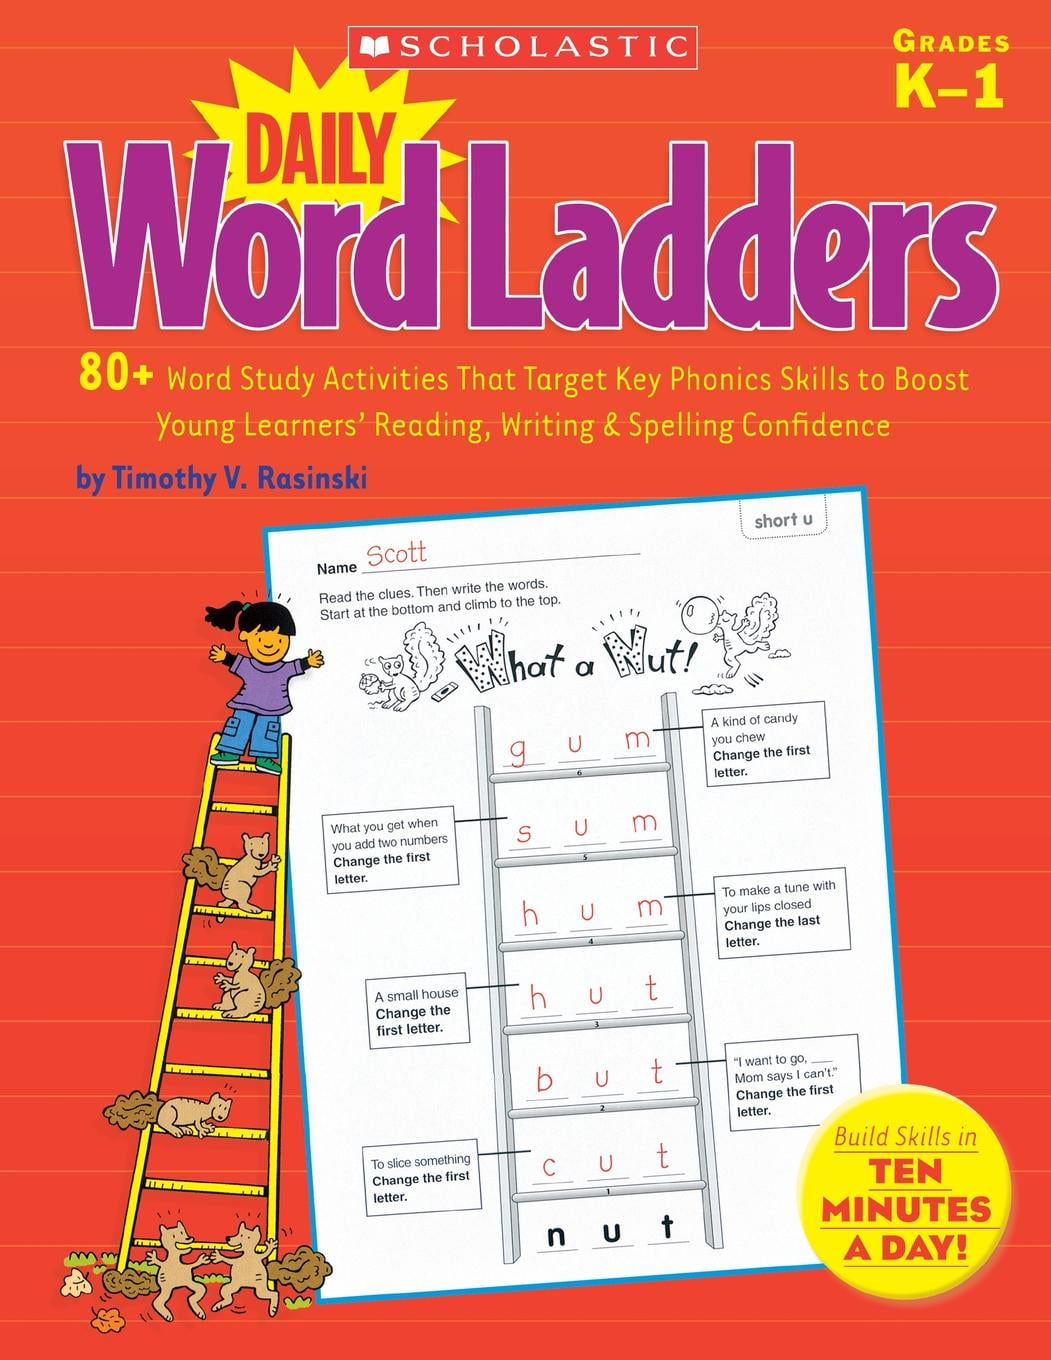 daily-word-ladders-grades-k-1-80-word-study-activities-that-target